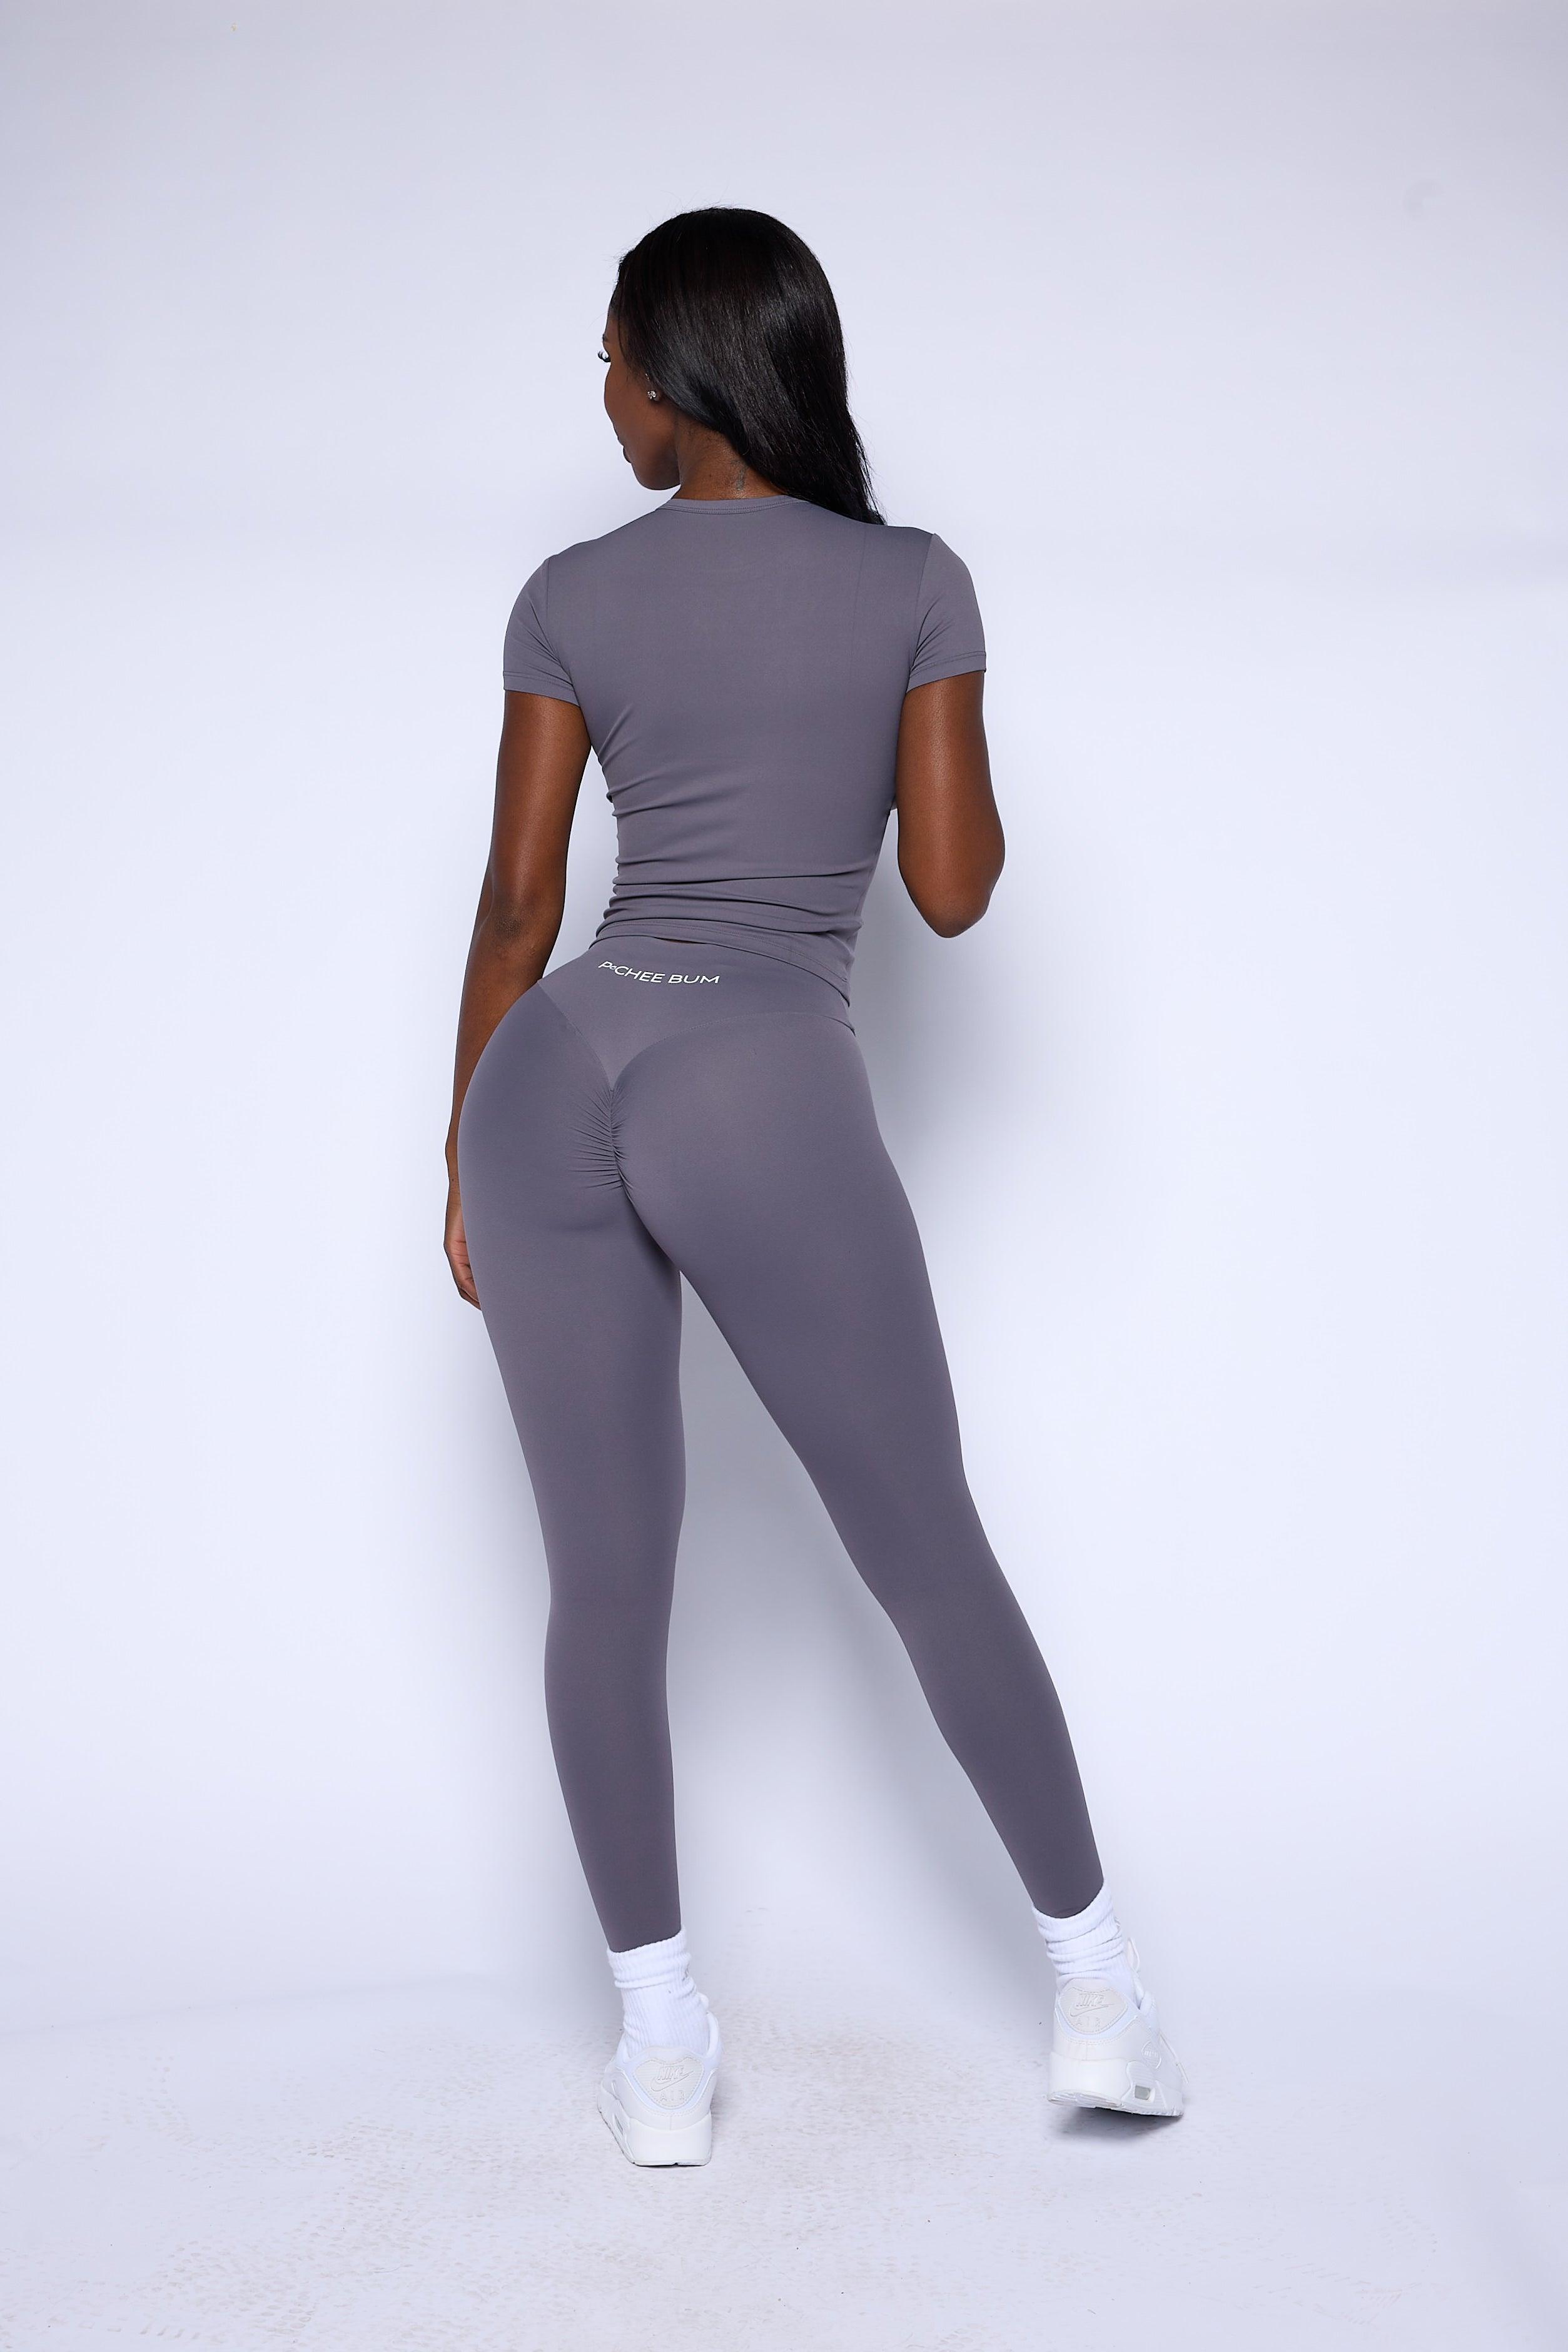 pcheebum  NEW Pchee Essential Mocha Tee and Legging Set is now